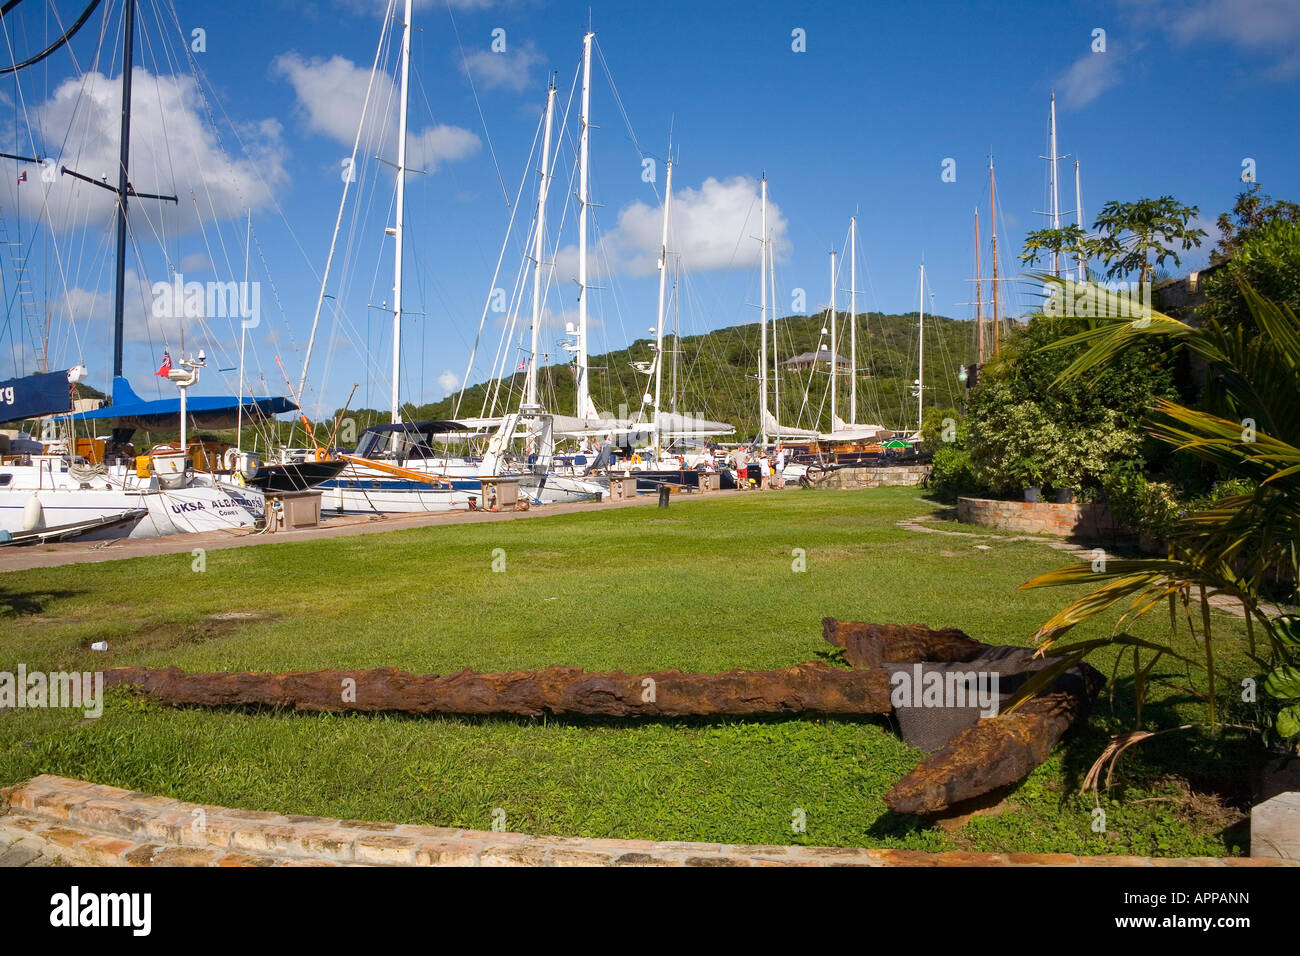 Boats at Nelsons Dockyard in Antigua Stock Photo